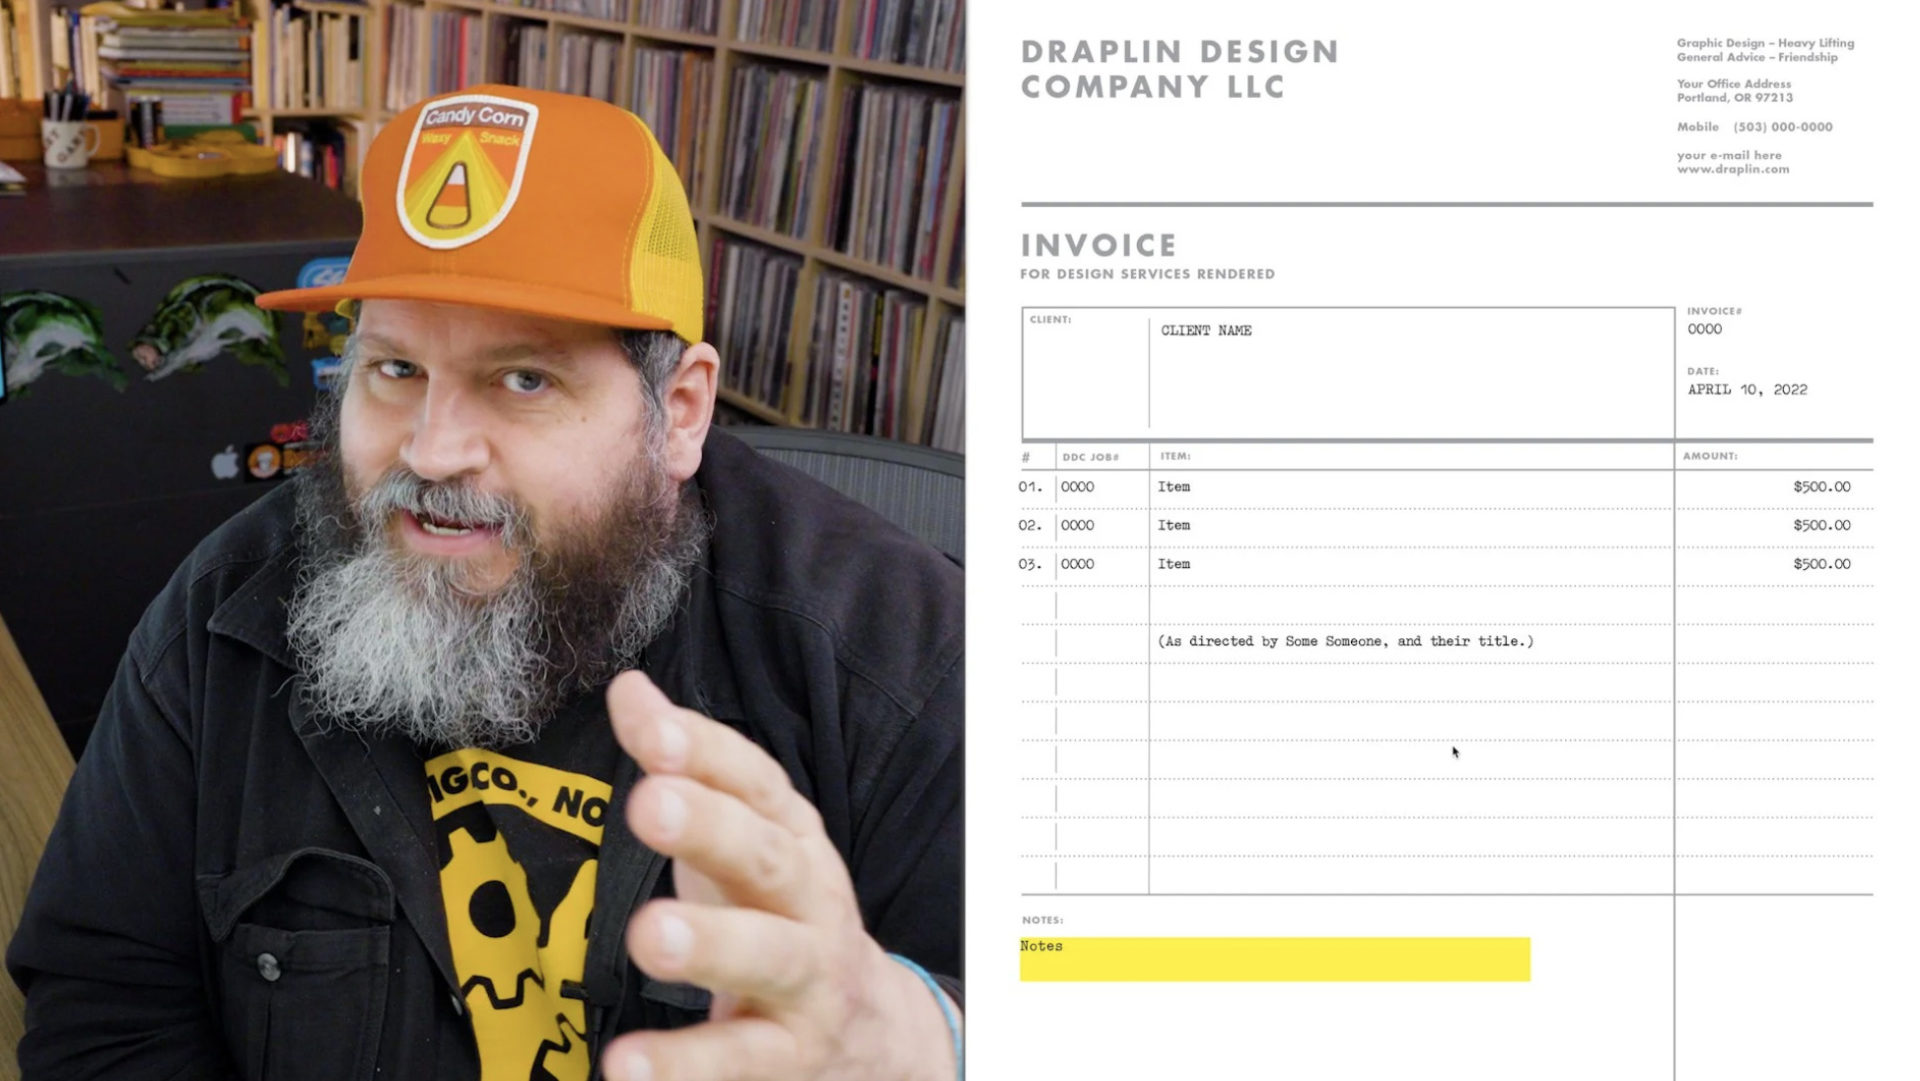 A split screen feating Designer Aaron Draplin on the left. He is wearing a black shirt and an orange hat, sits at his desk. On the righ side of the screen is an example of a client invoice from Draplin Design Company.